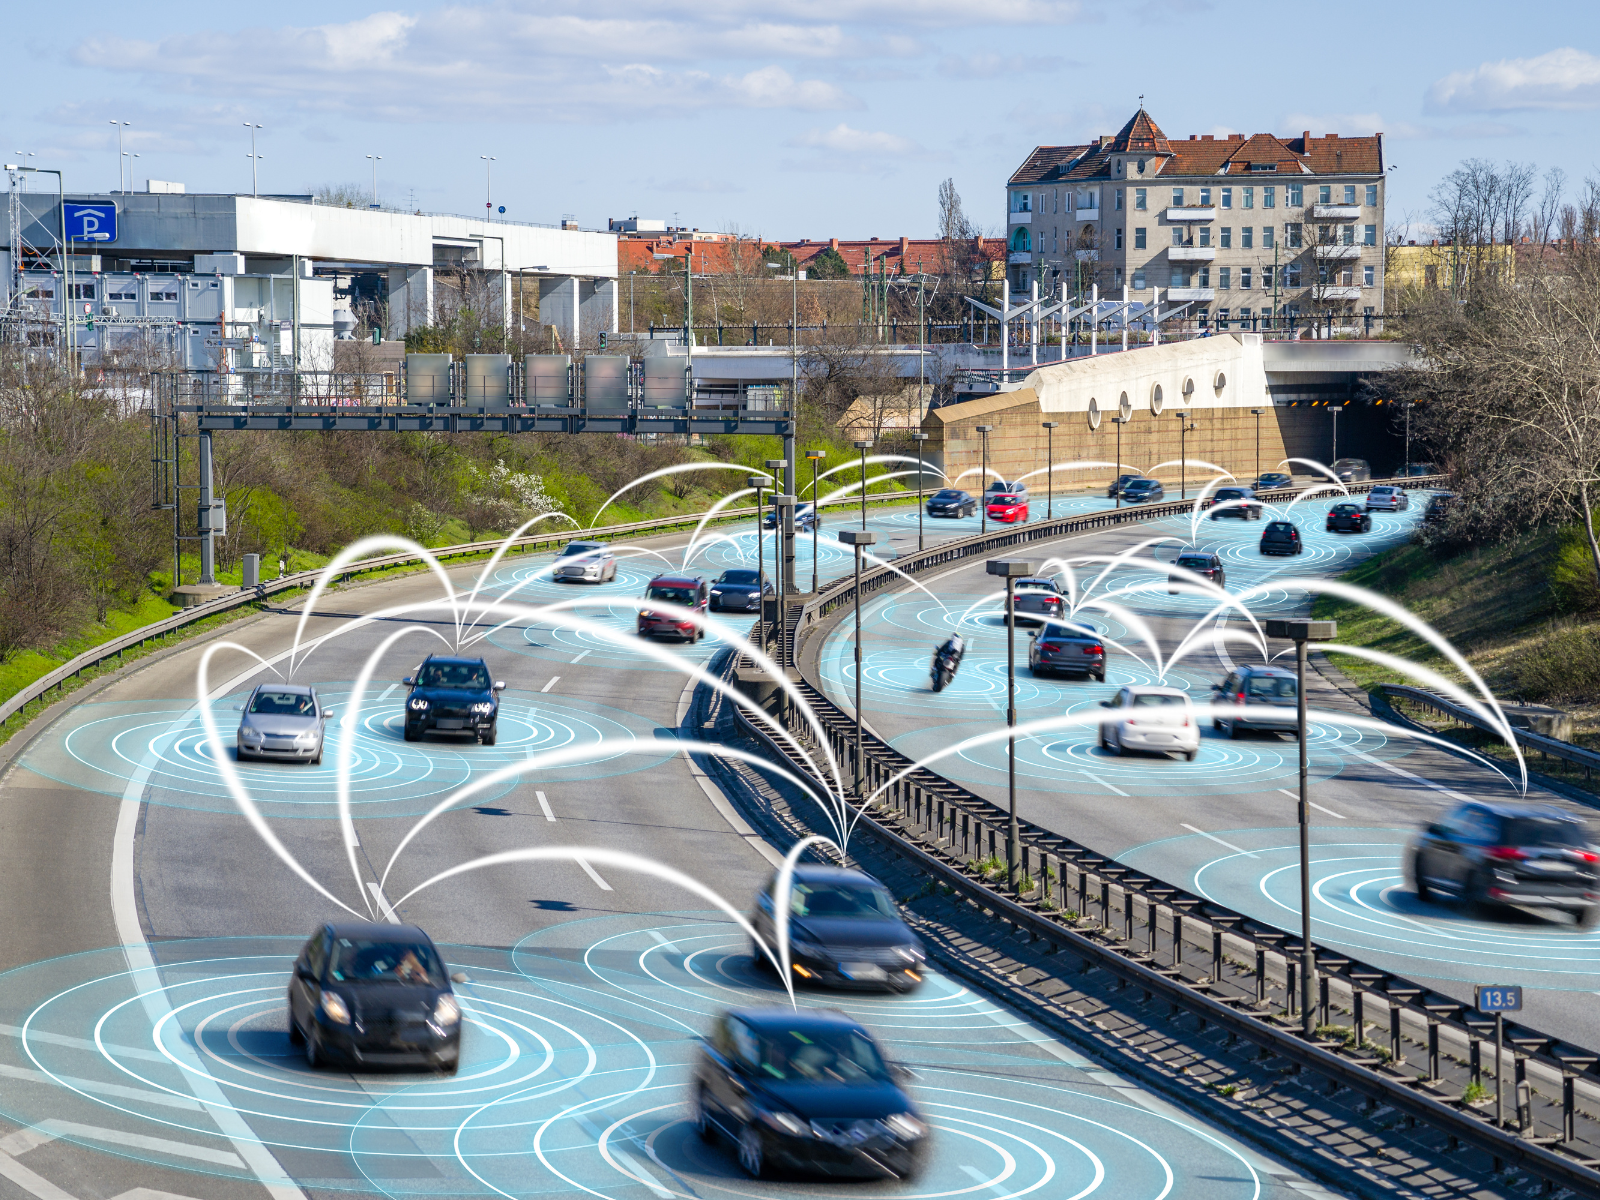 Funding to accelerate and spur new deployments of vehicle-to-everything (V2X) technologies 